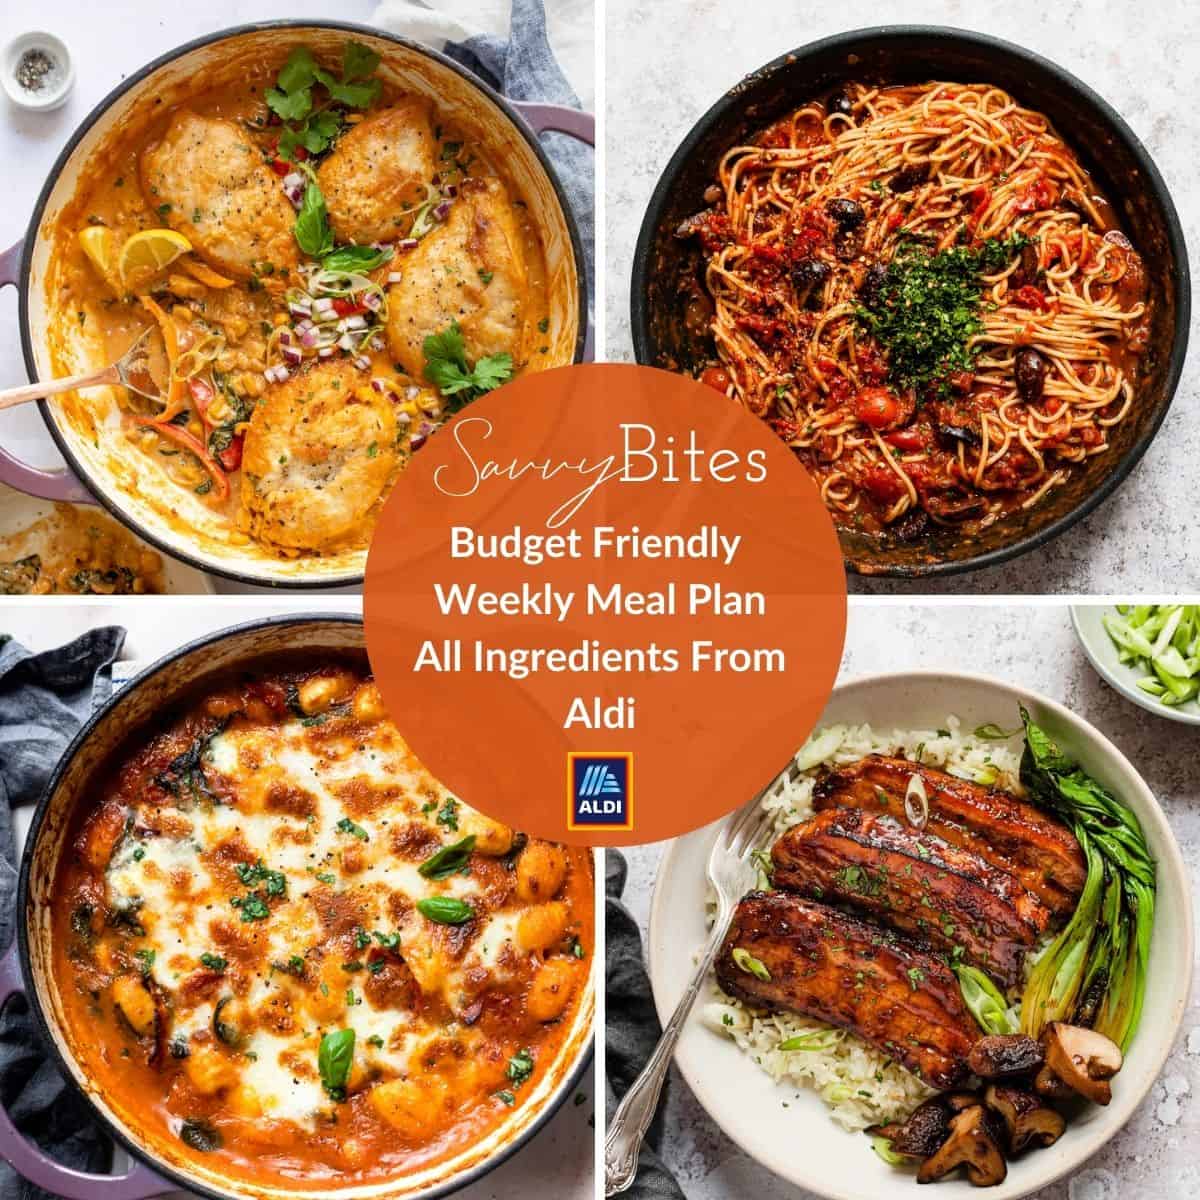 Aldi meal plan photo collage.